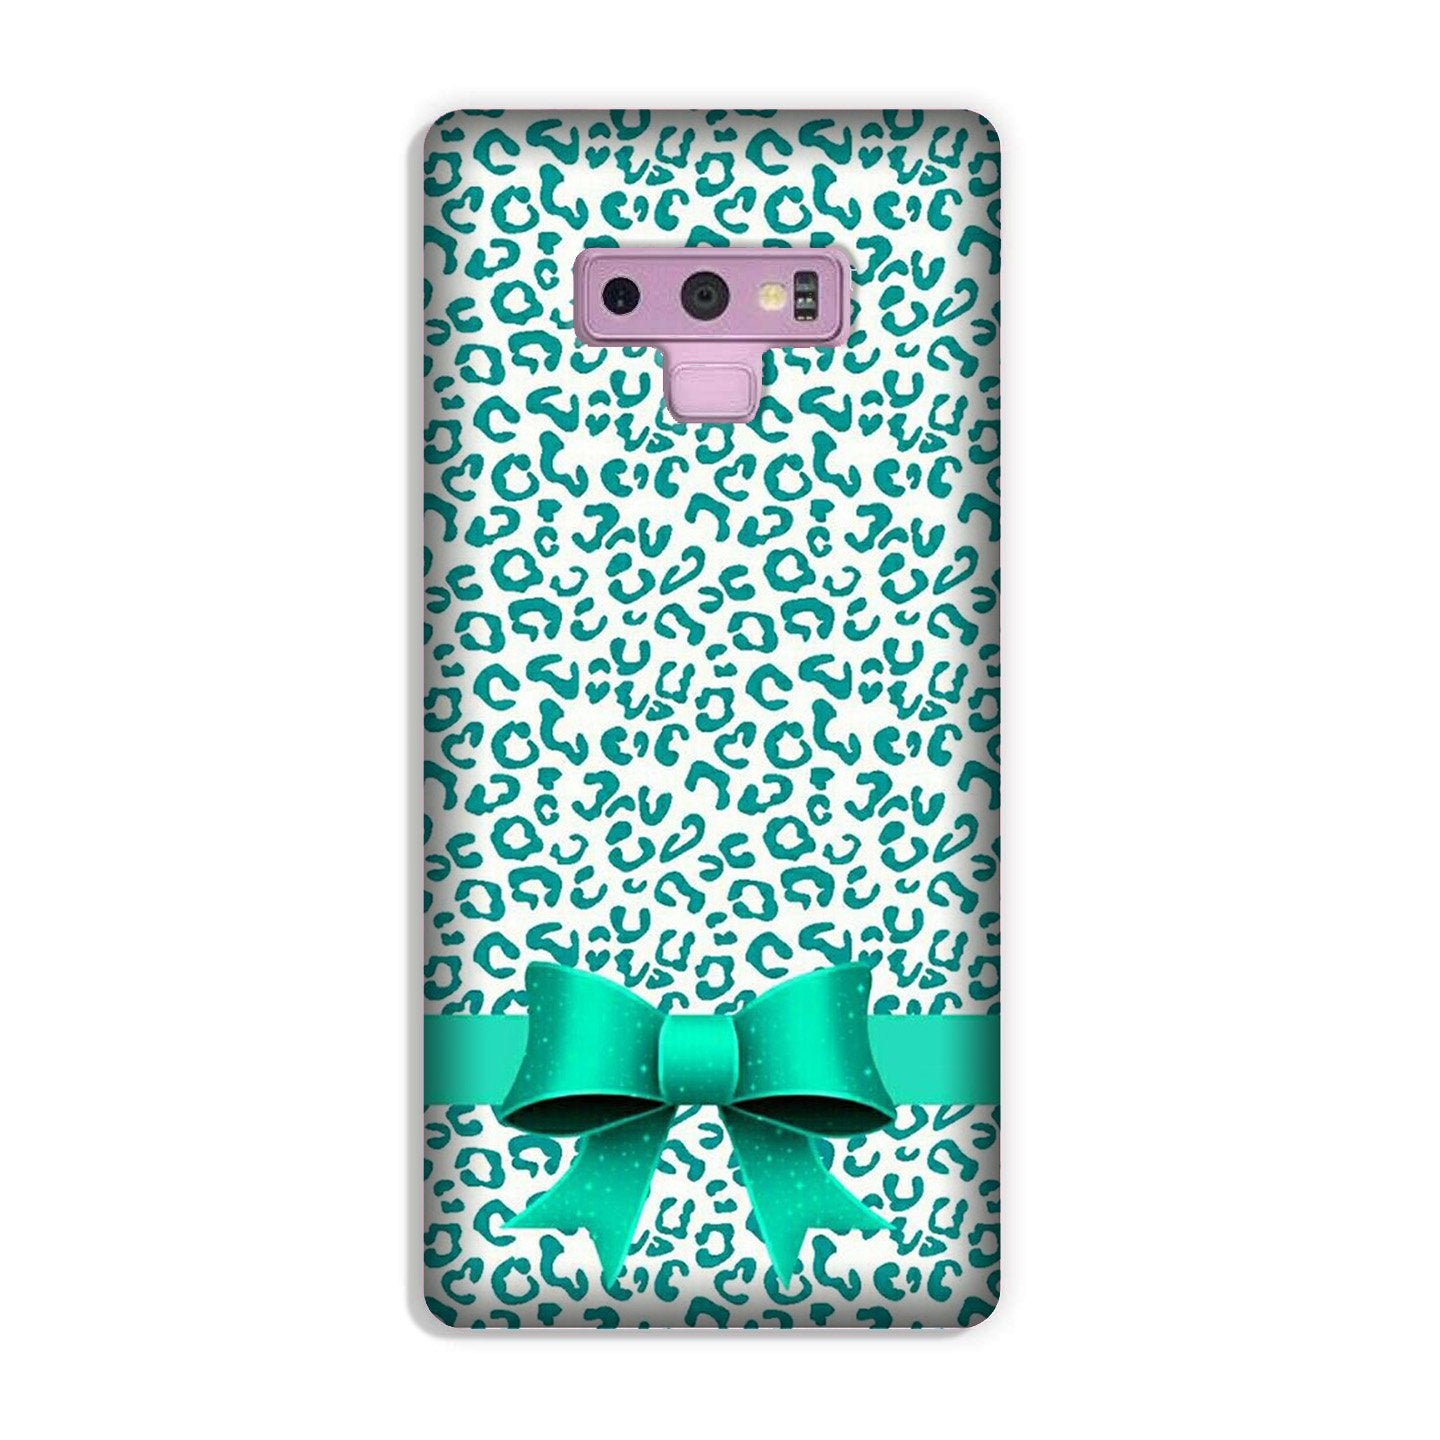 Gift Wrap6 Case for Galaxy Note 9